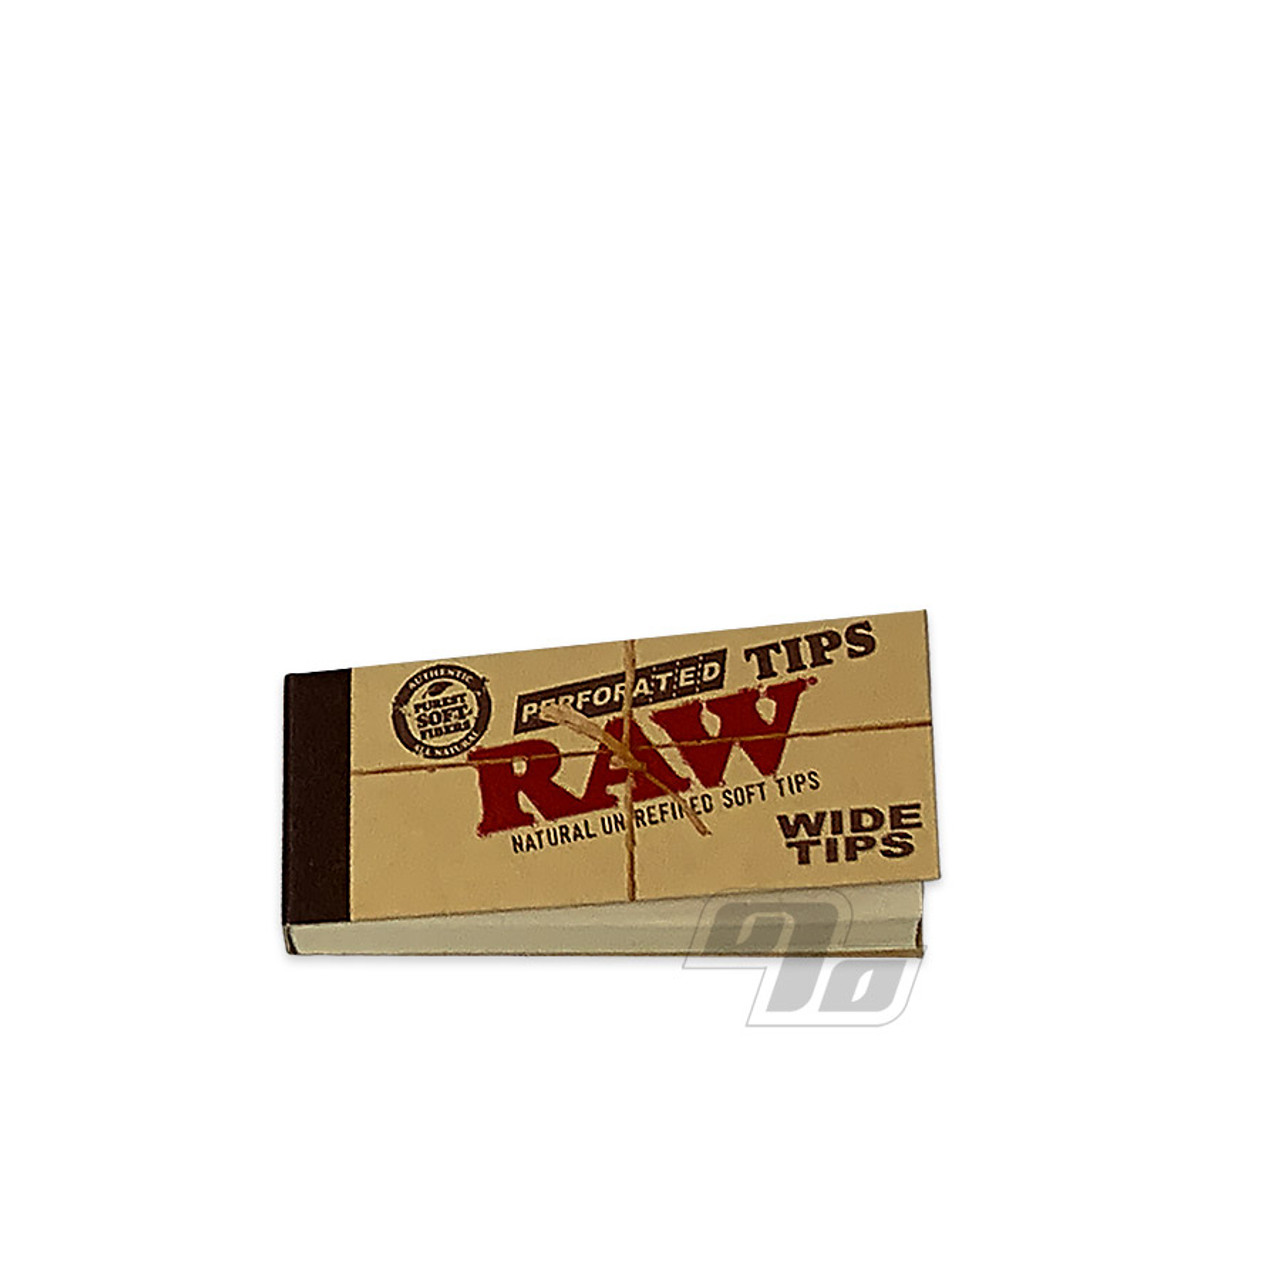 RAW Filter Tips 50 Packs of 50 – Tobacco Stock